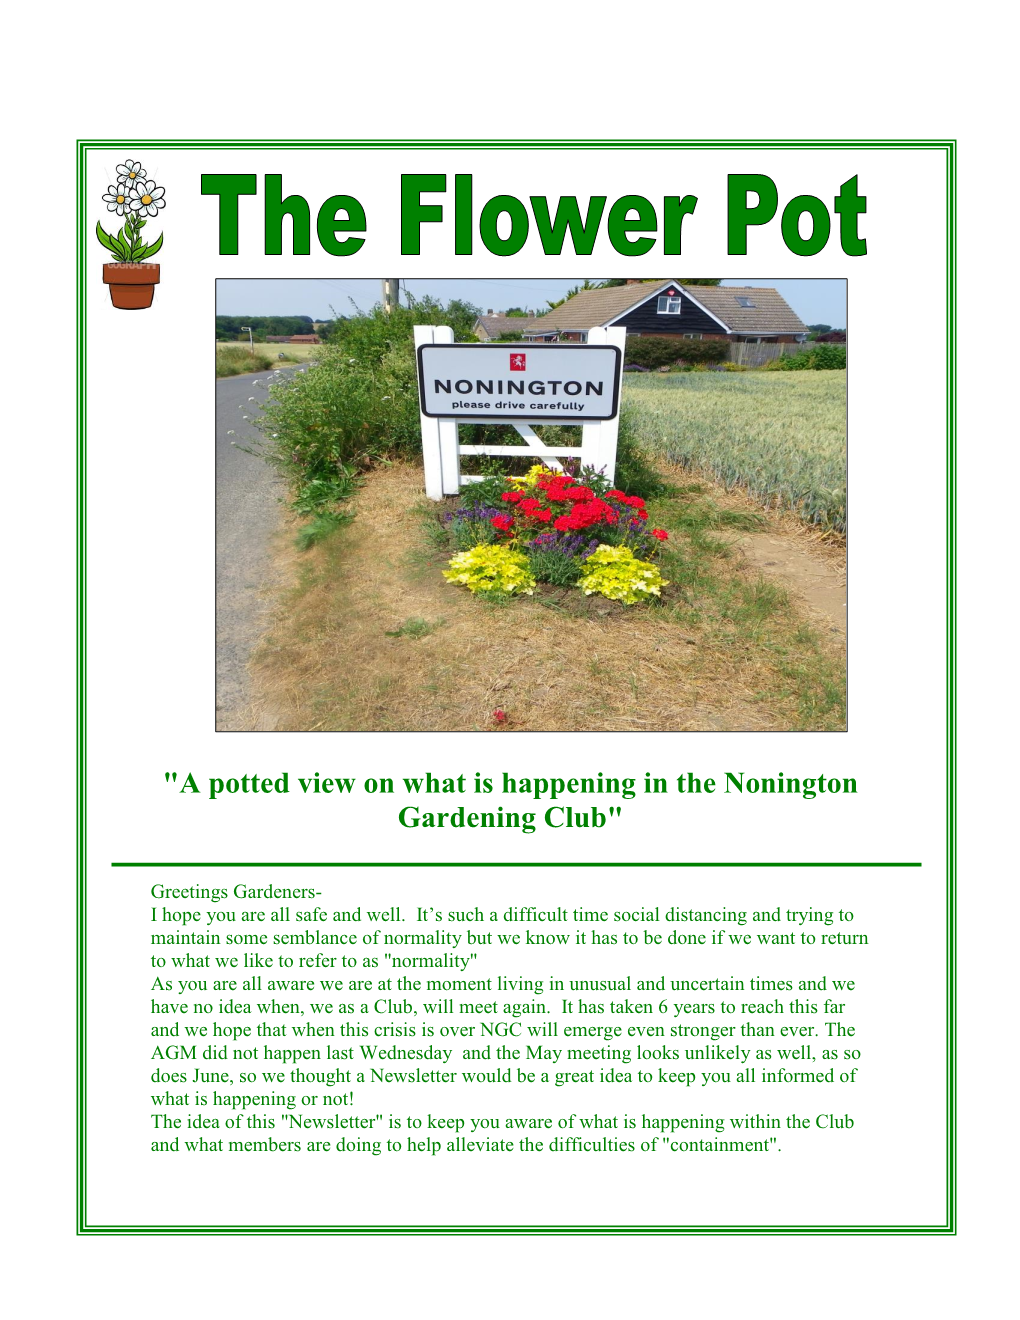 "A Potted View on What Is Happening in the Nonington Gardening Club"